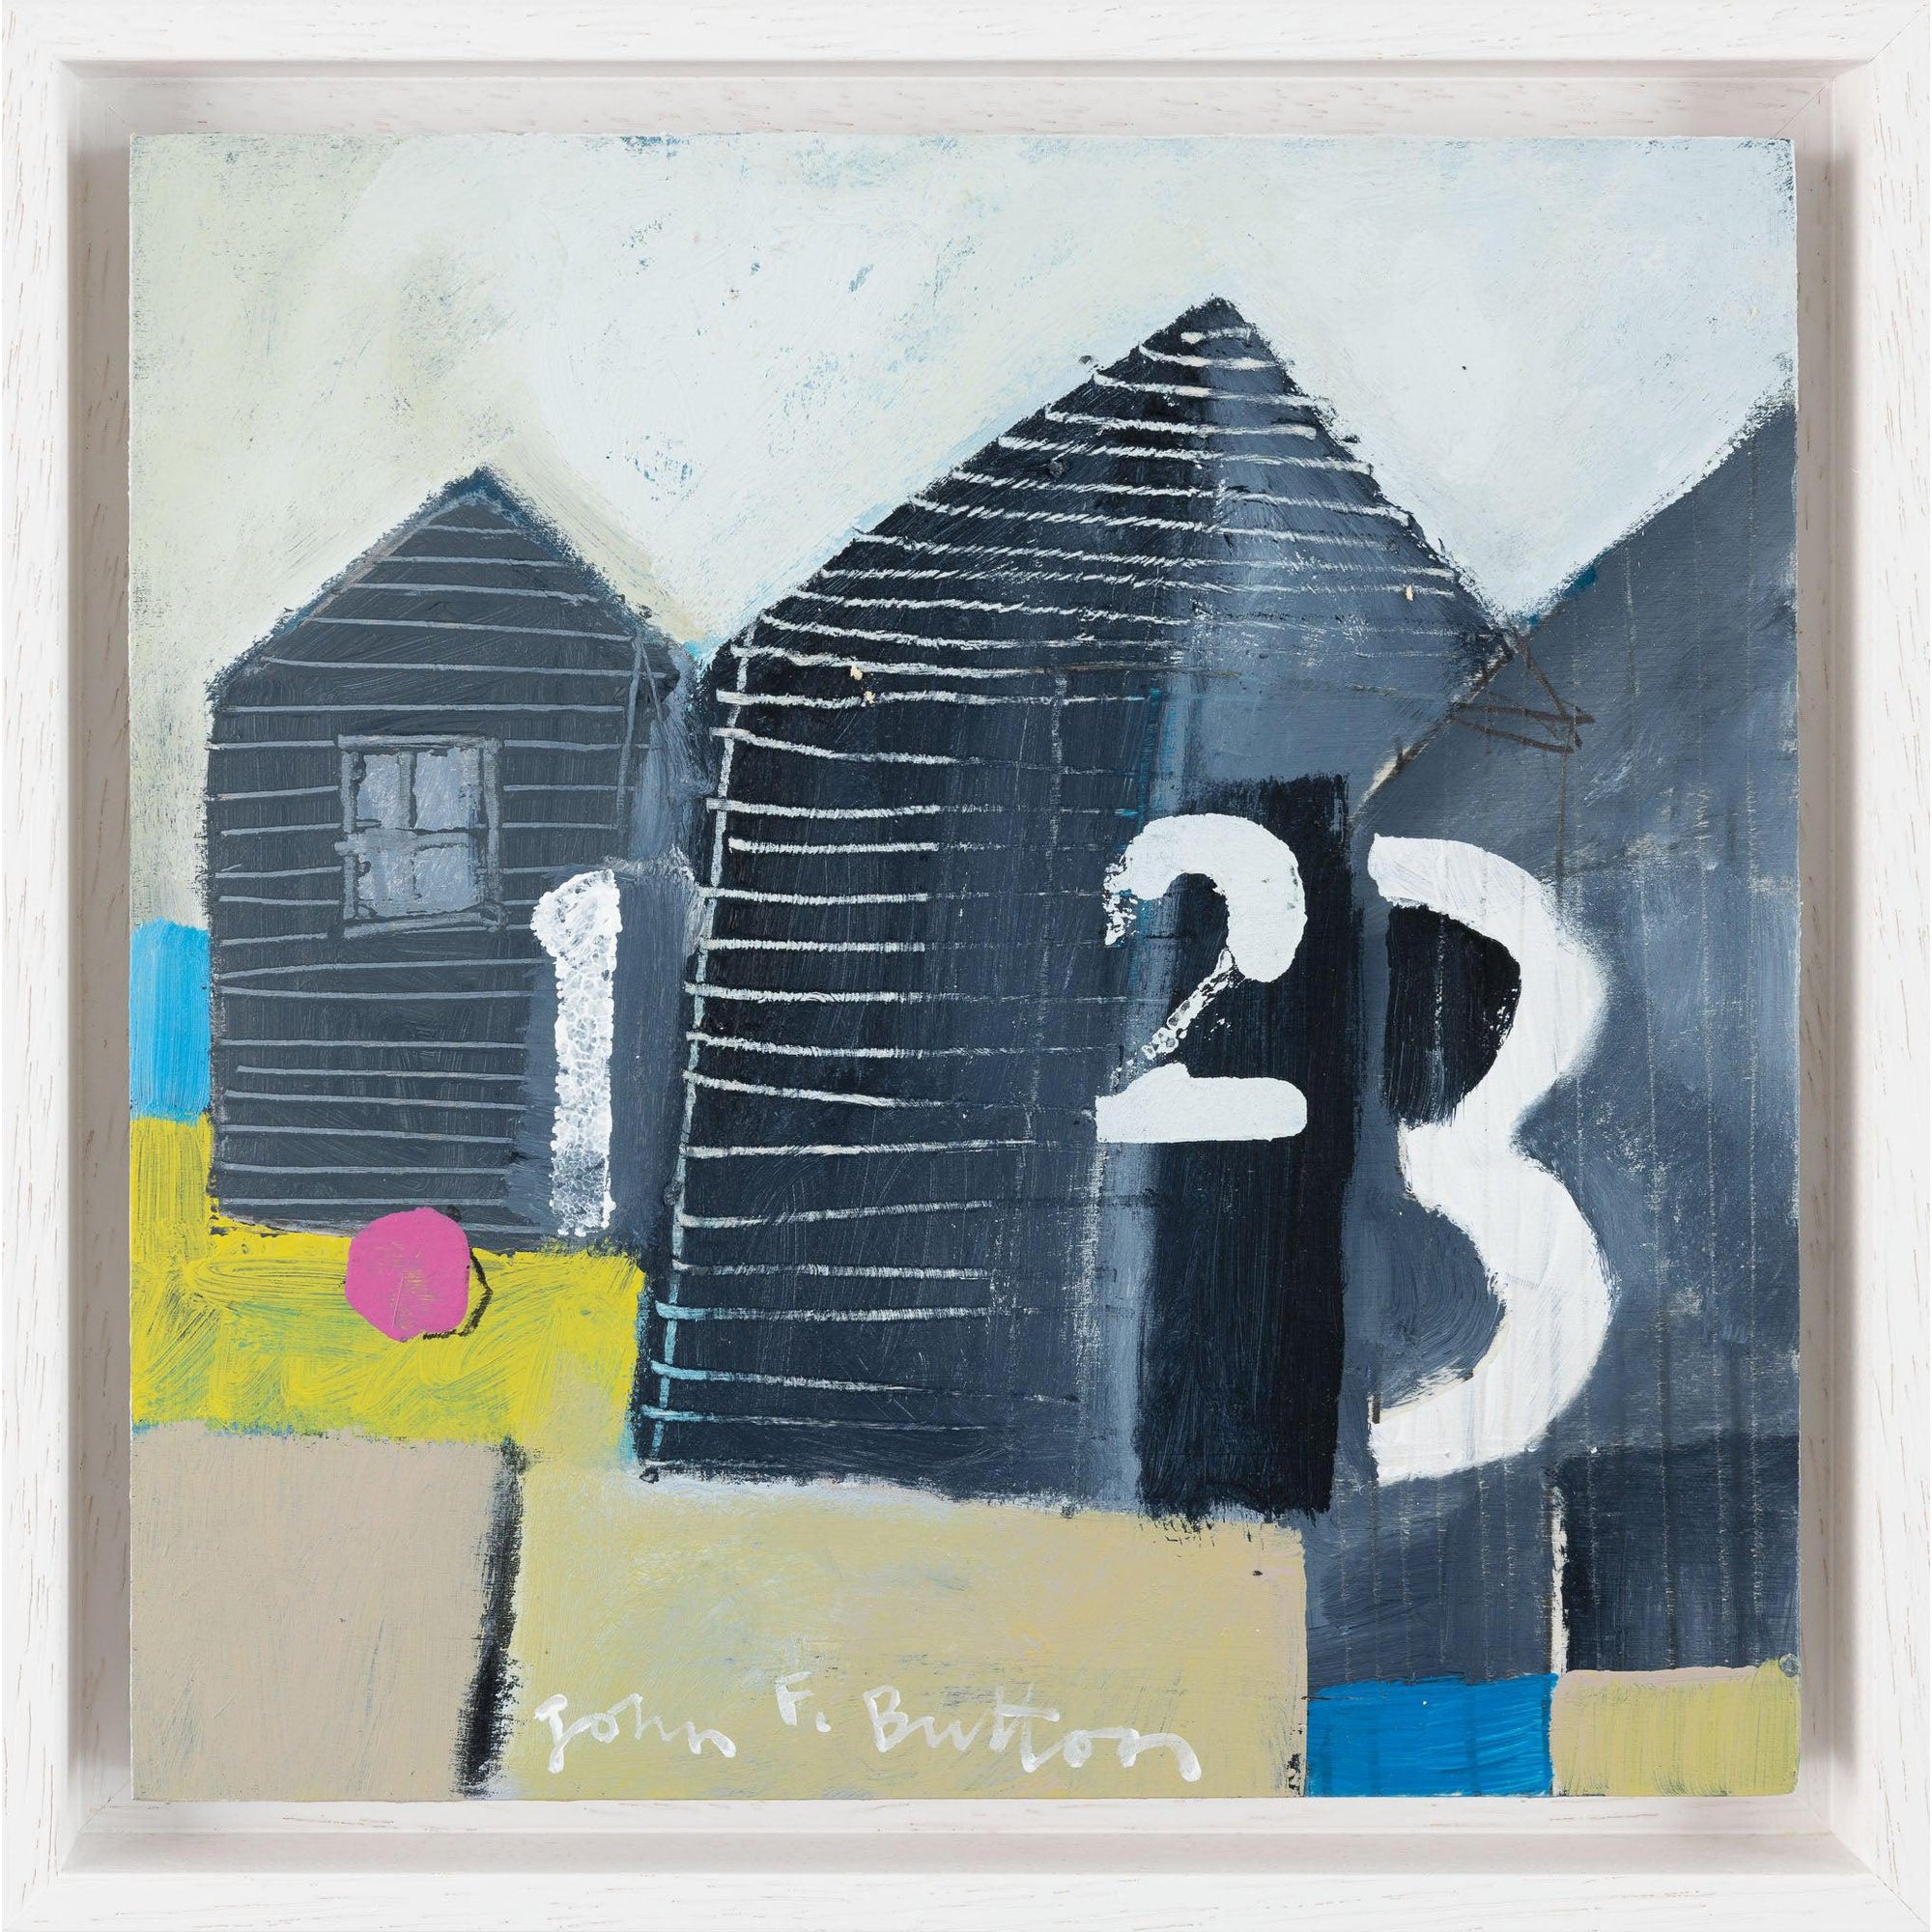 1, 2, 3... by John Button available at Padstow Gallery, Cornwall